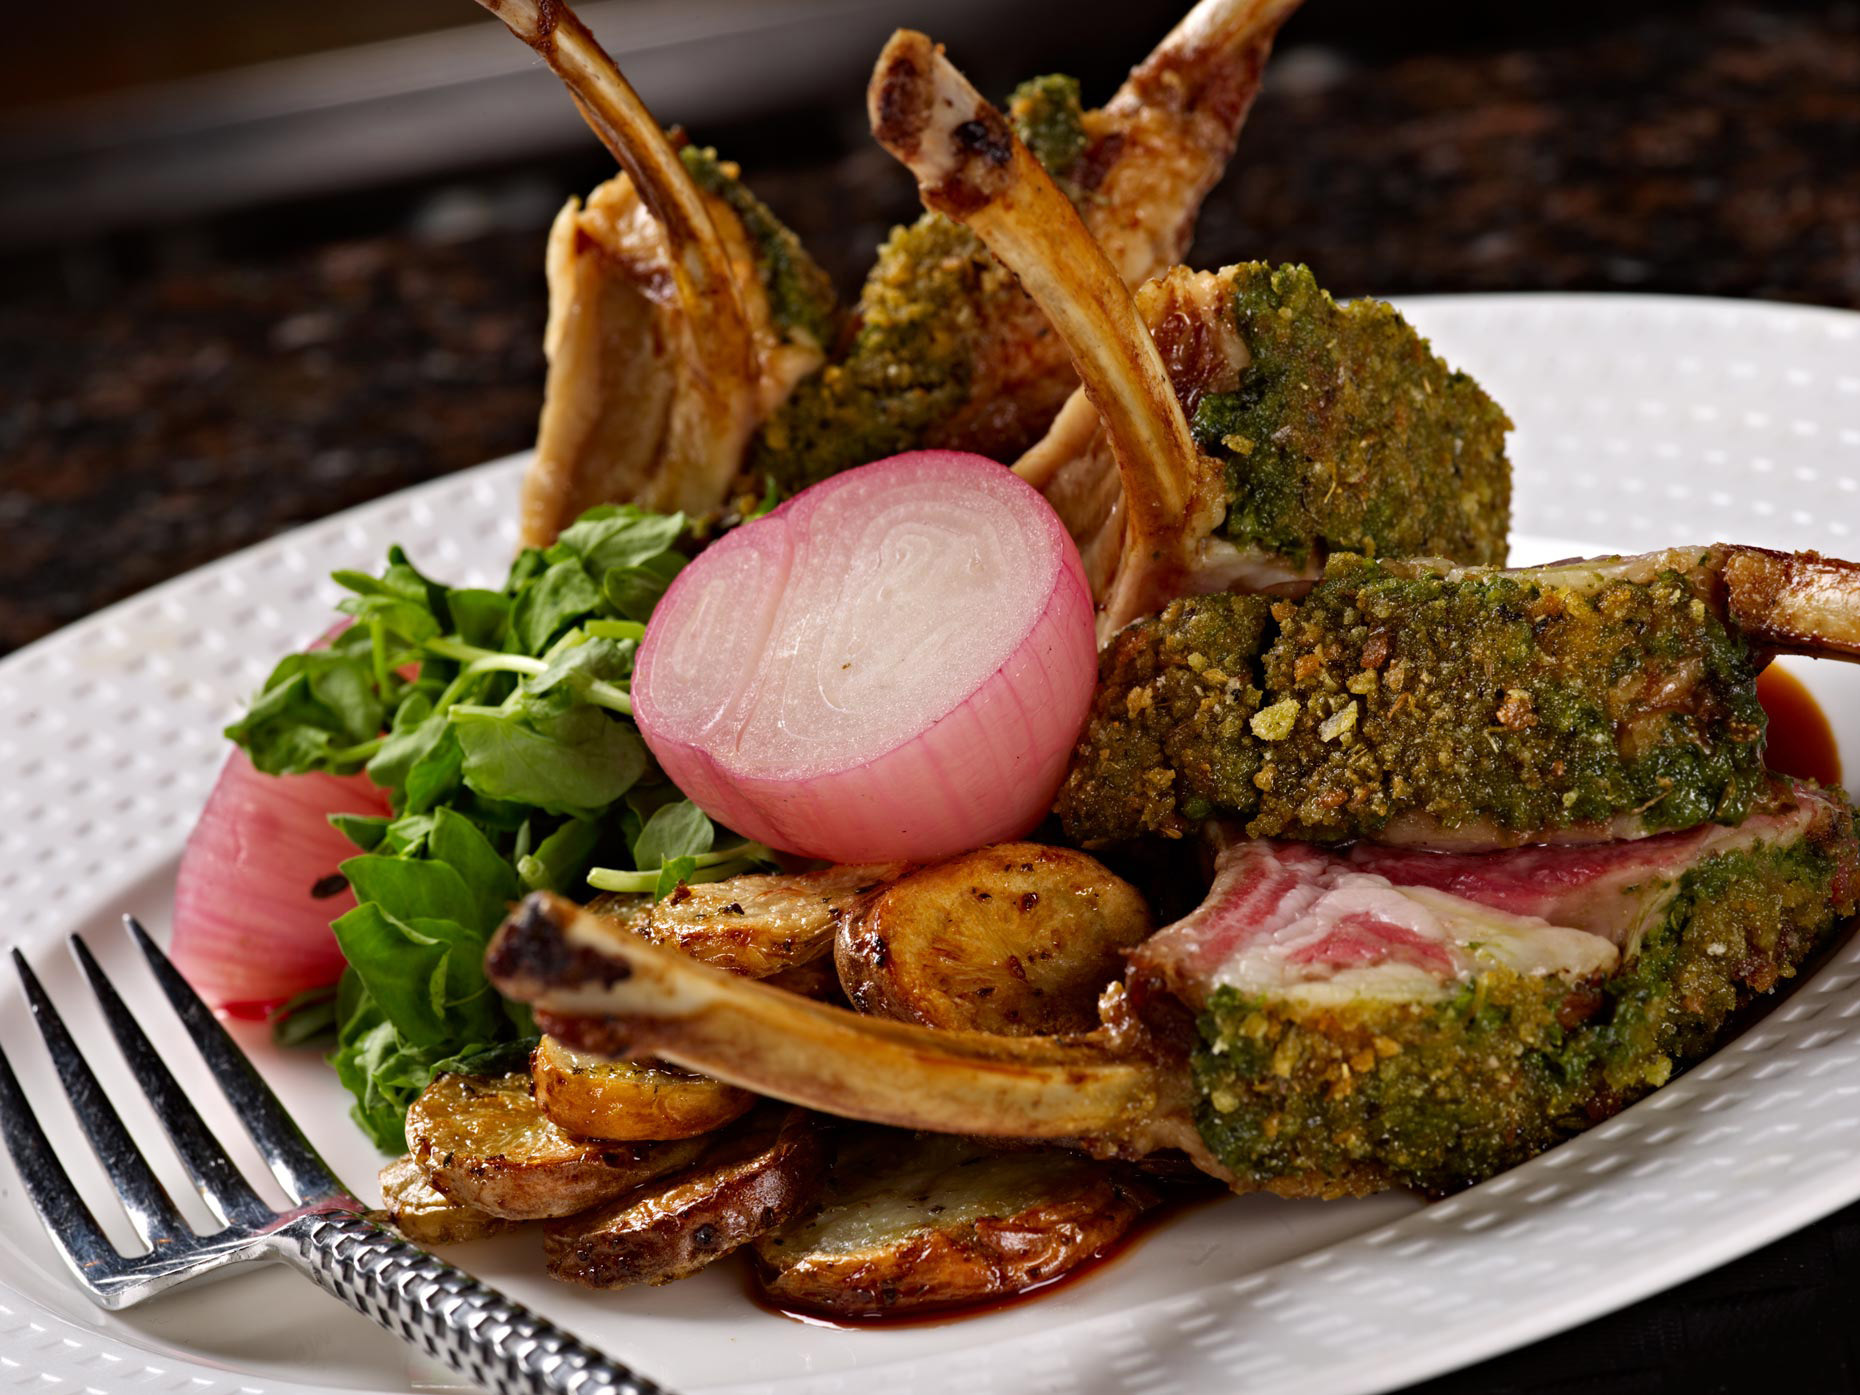  Food & Beverage Photography | Nut crusted lamb chops 